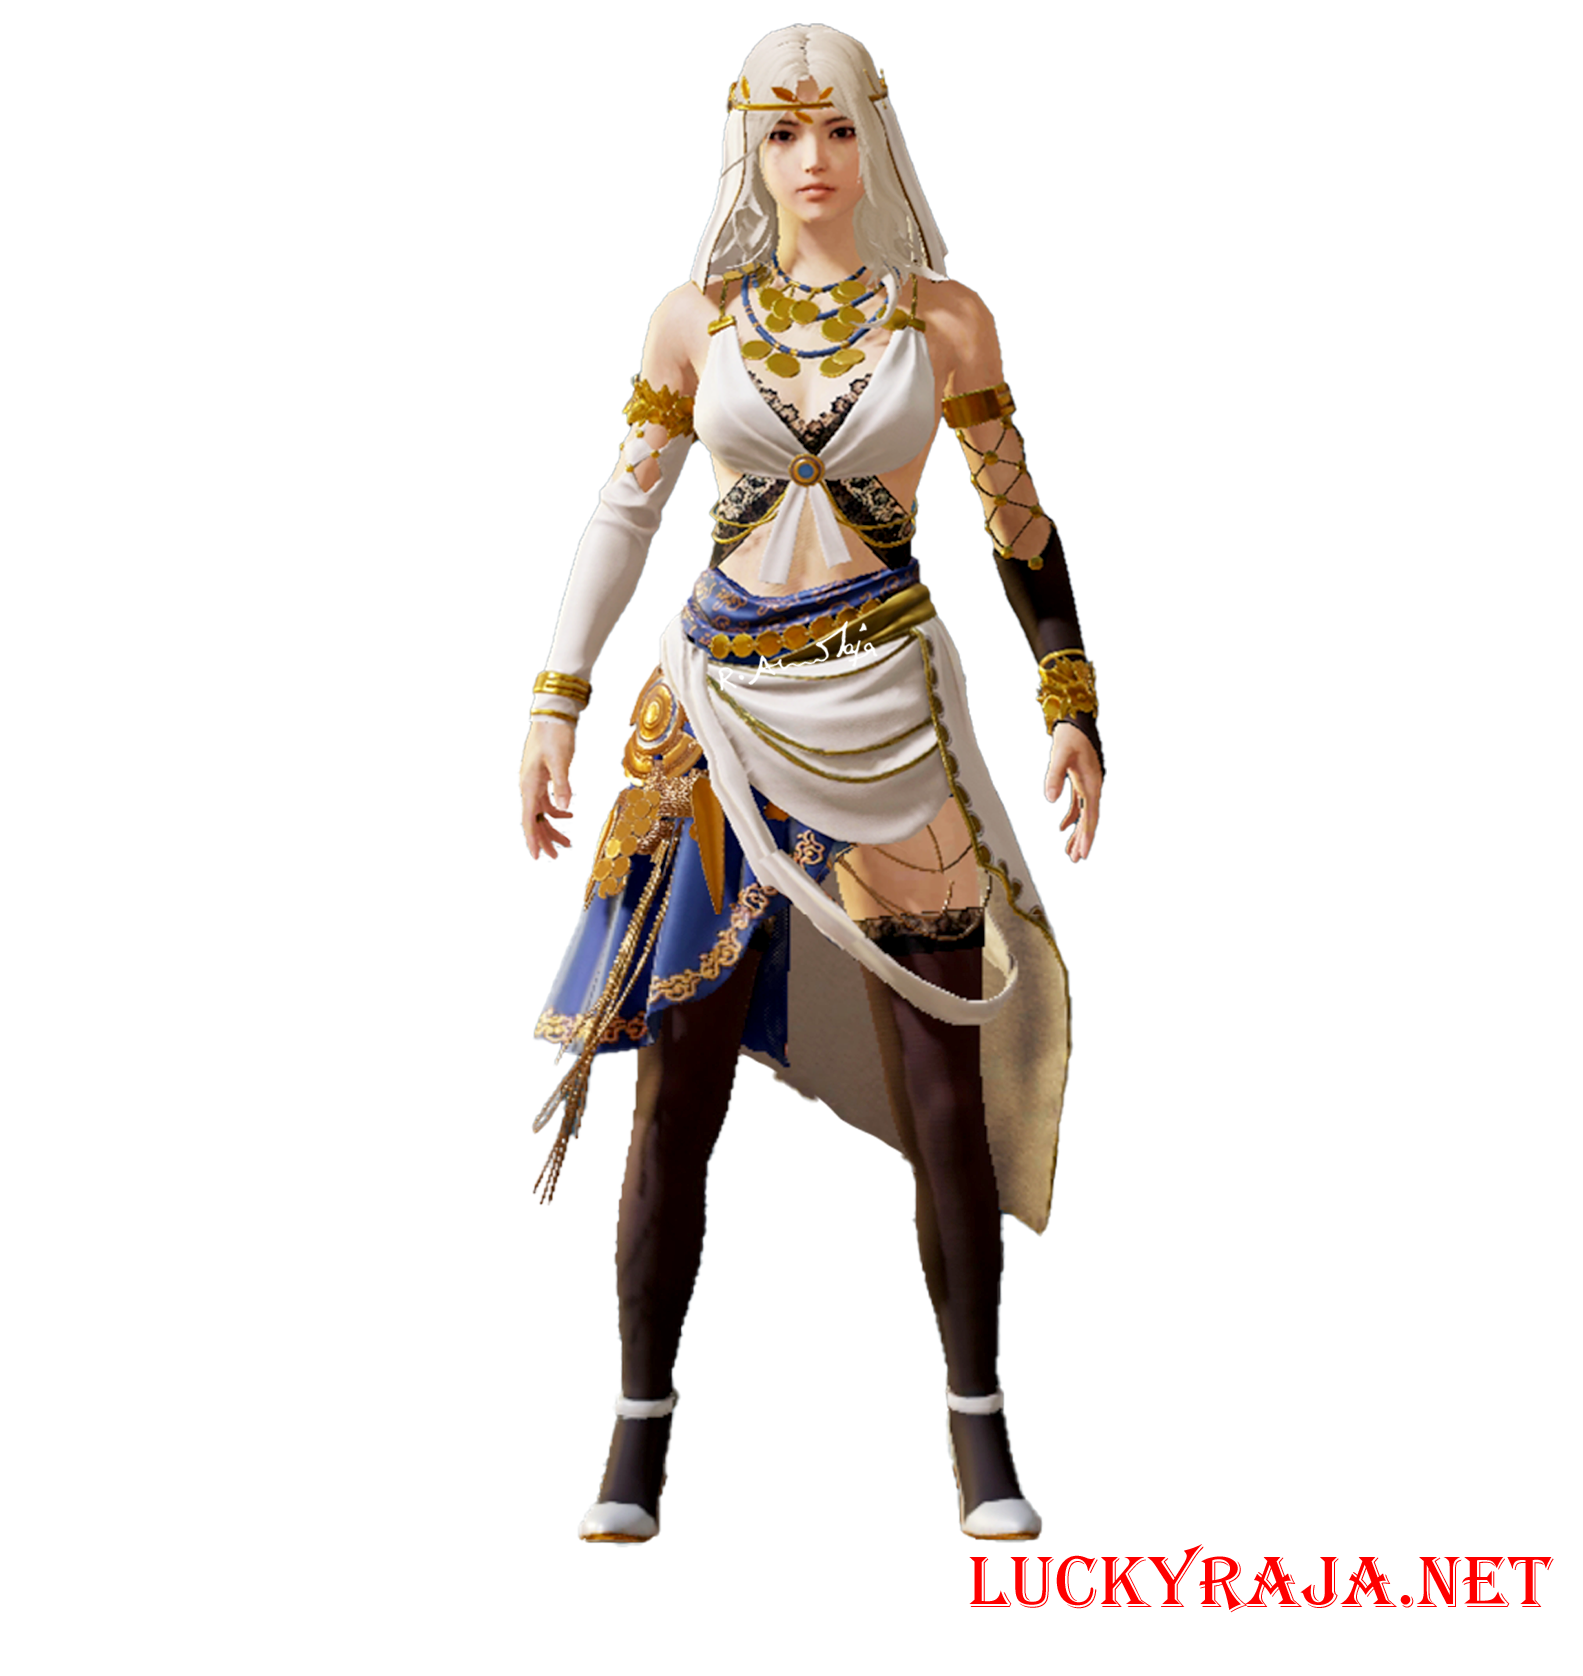 Divine Seer,Divine Seer set ,Divine Seer images,Divine Seer pubg mobile,Divine Seer outfit,pubg mobile outfits,animation,cartoon images